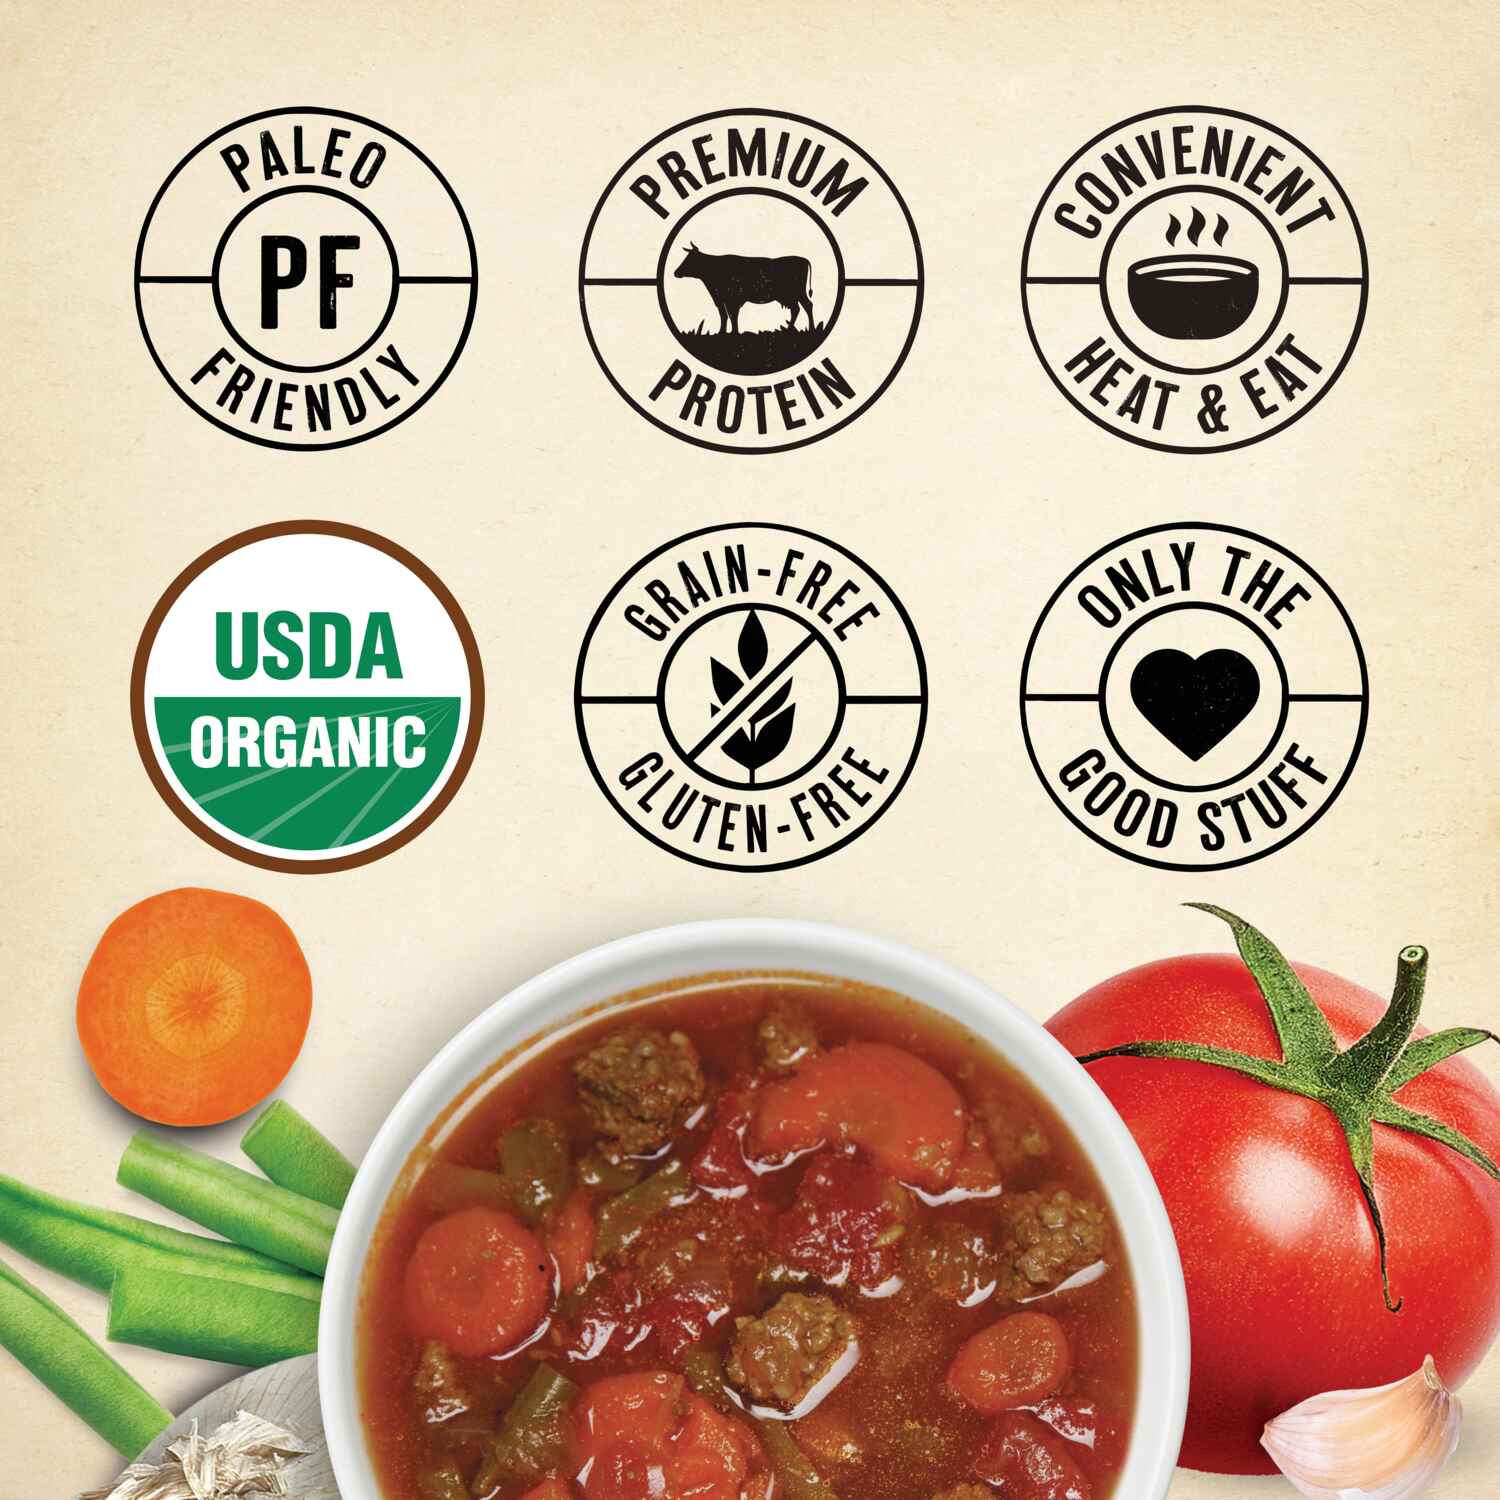 True Primal Beef and Vegetable Organic Soup benefits